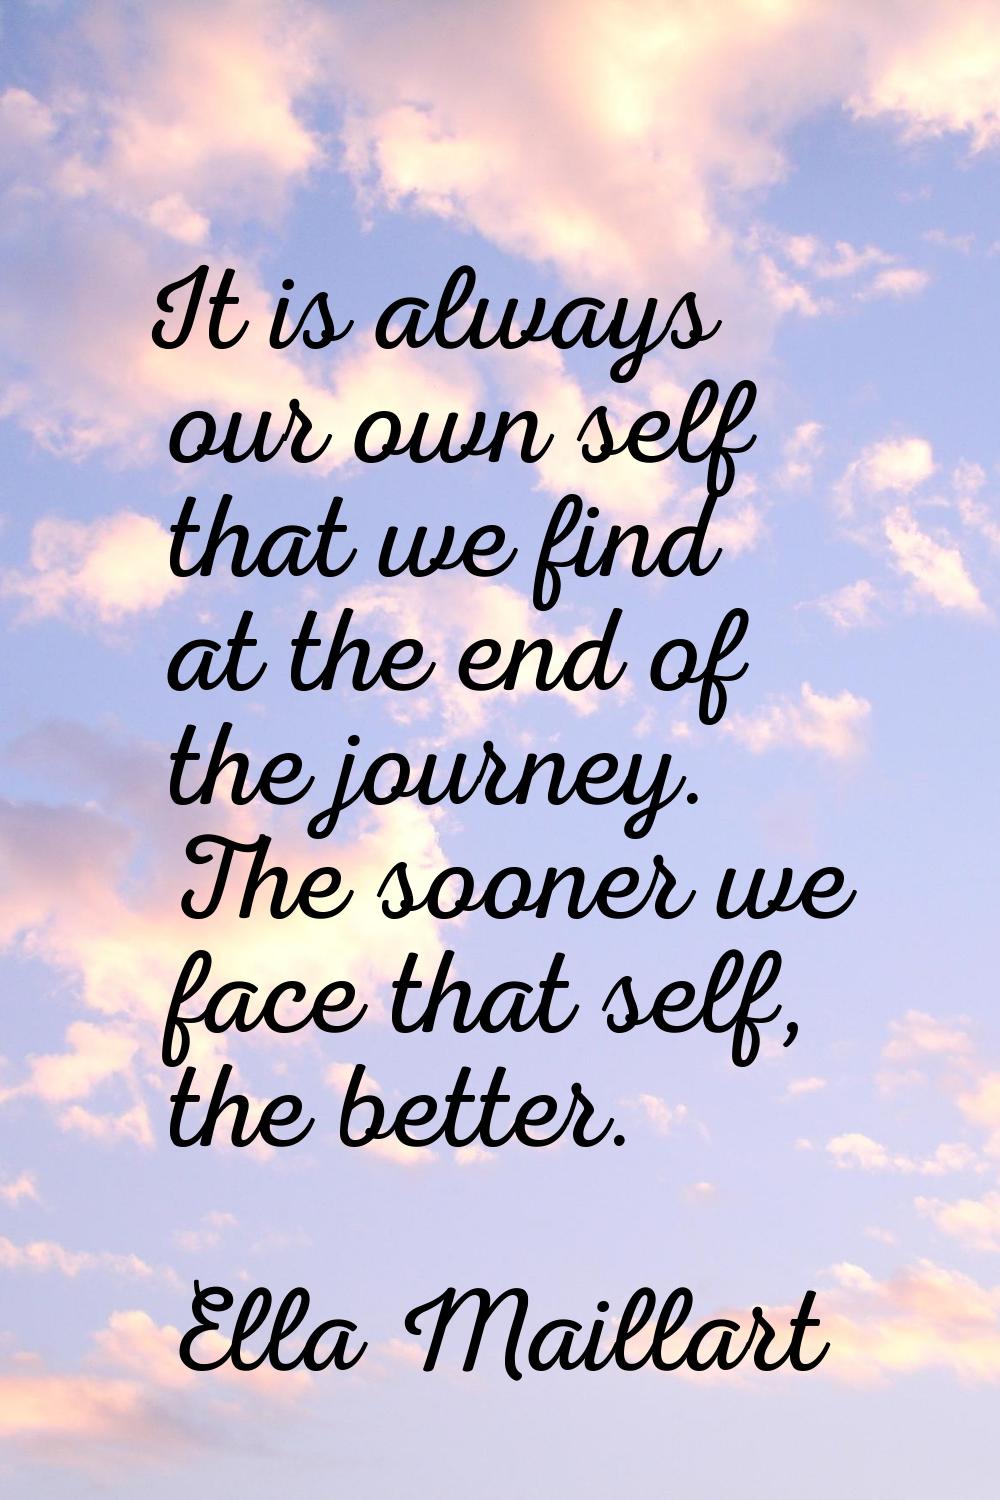 It is always our own self that we find at the end of the journey. The sooner we face that self, the